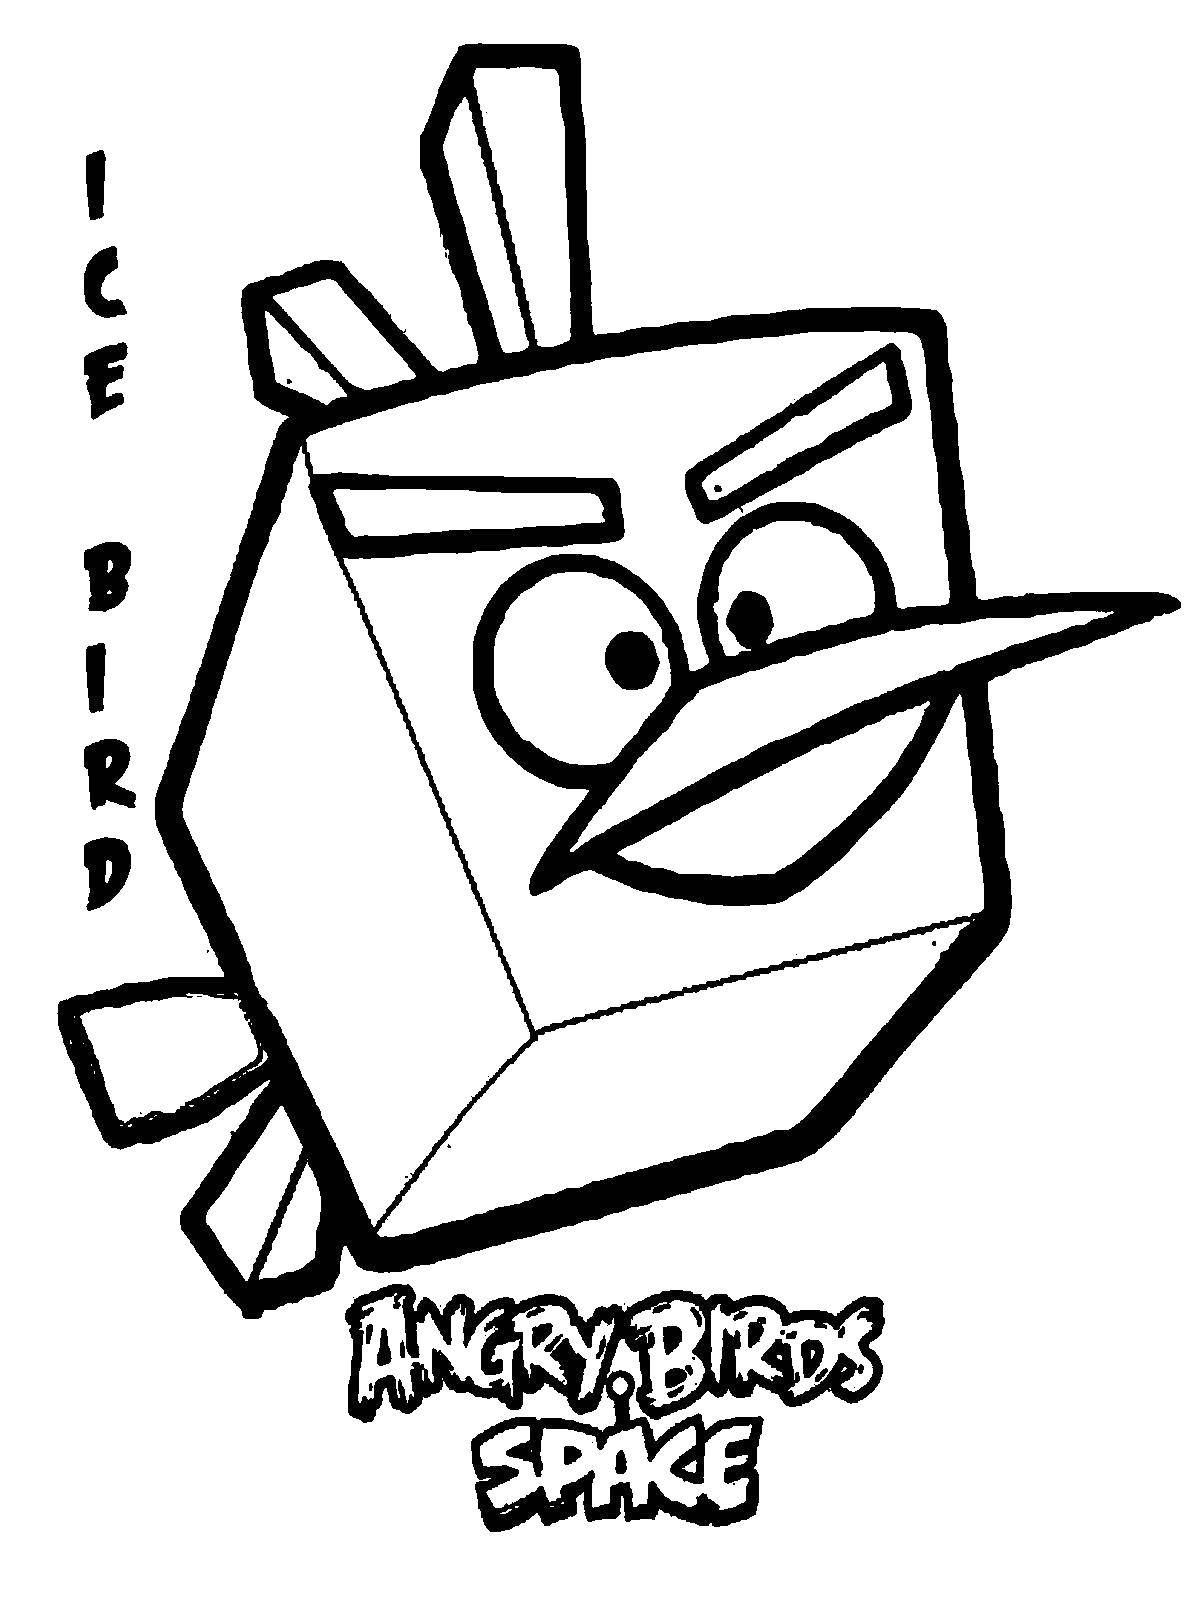 Coloring Angry birds. Category angry birds. Tags:  angry birds.